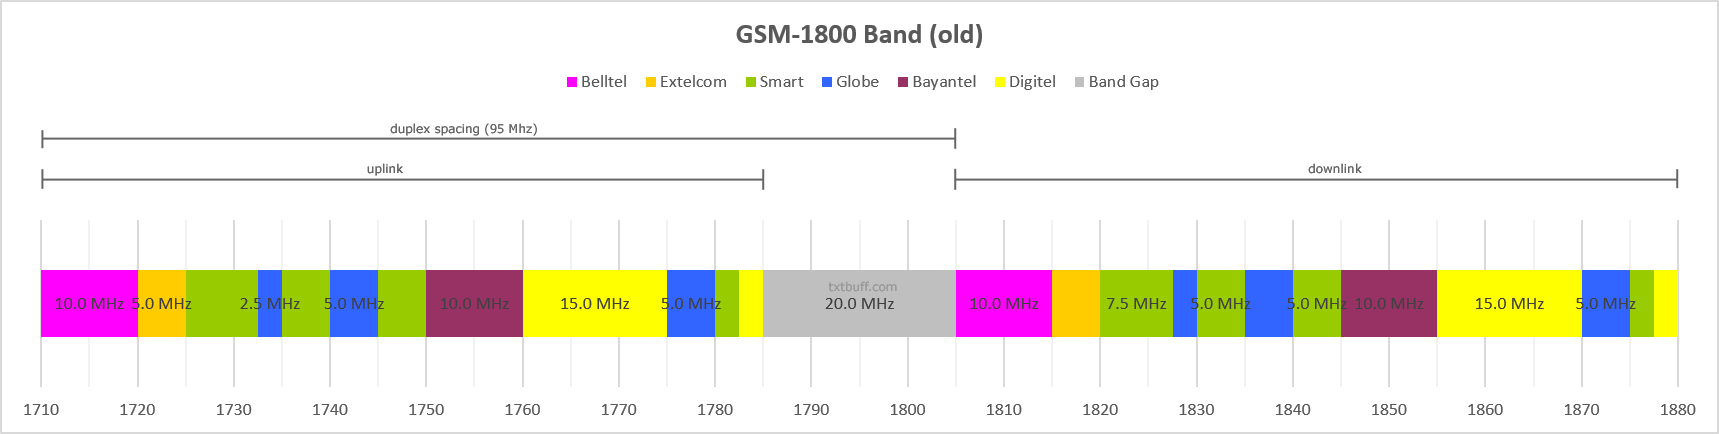 GSM-1800 band Philippines